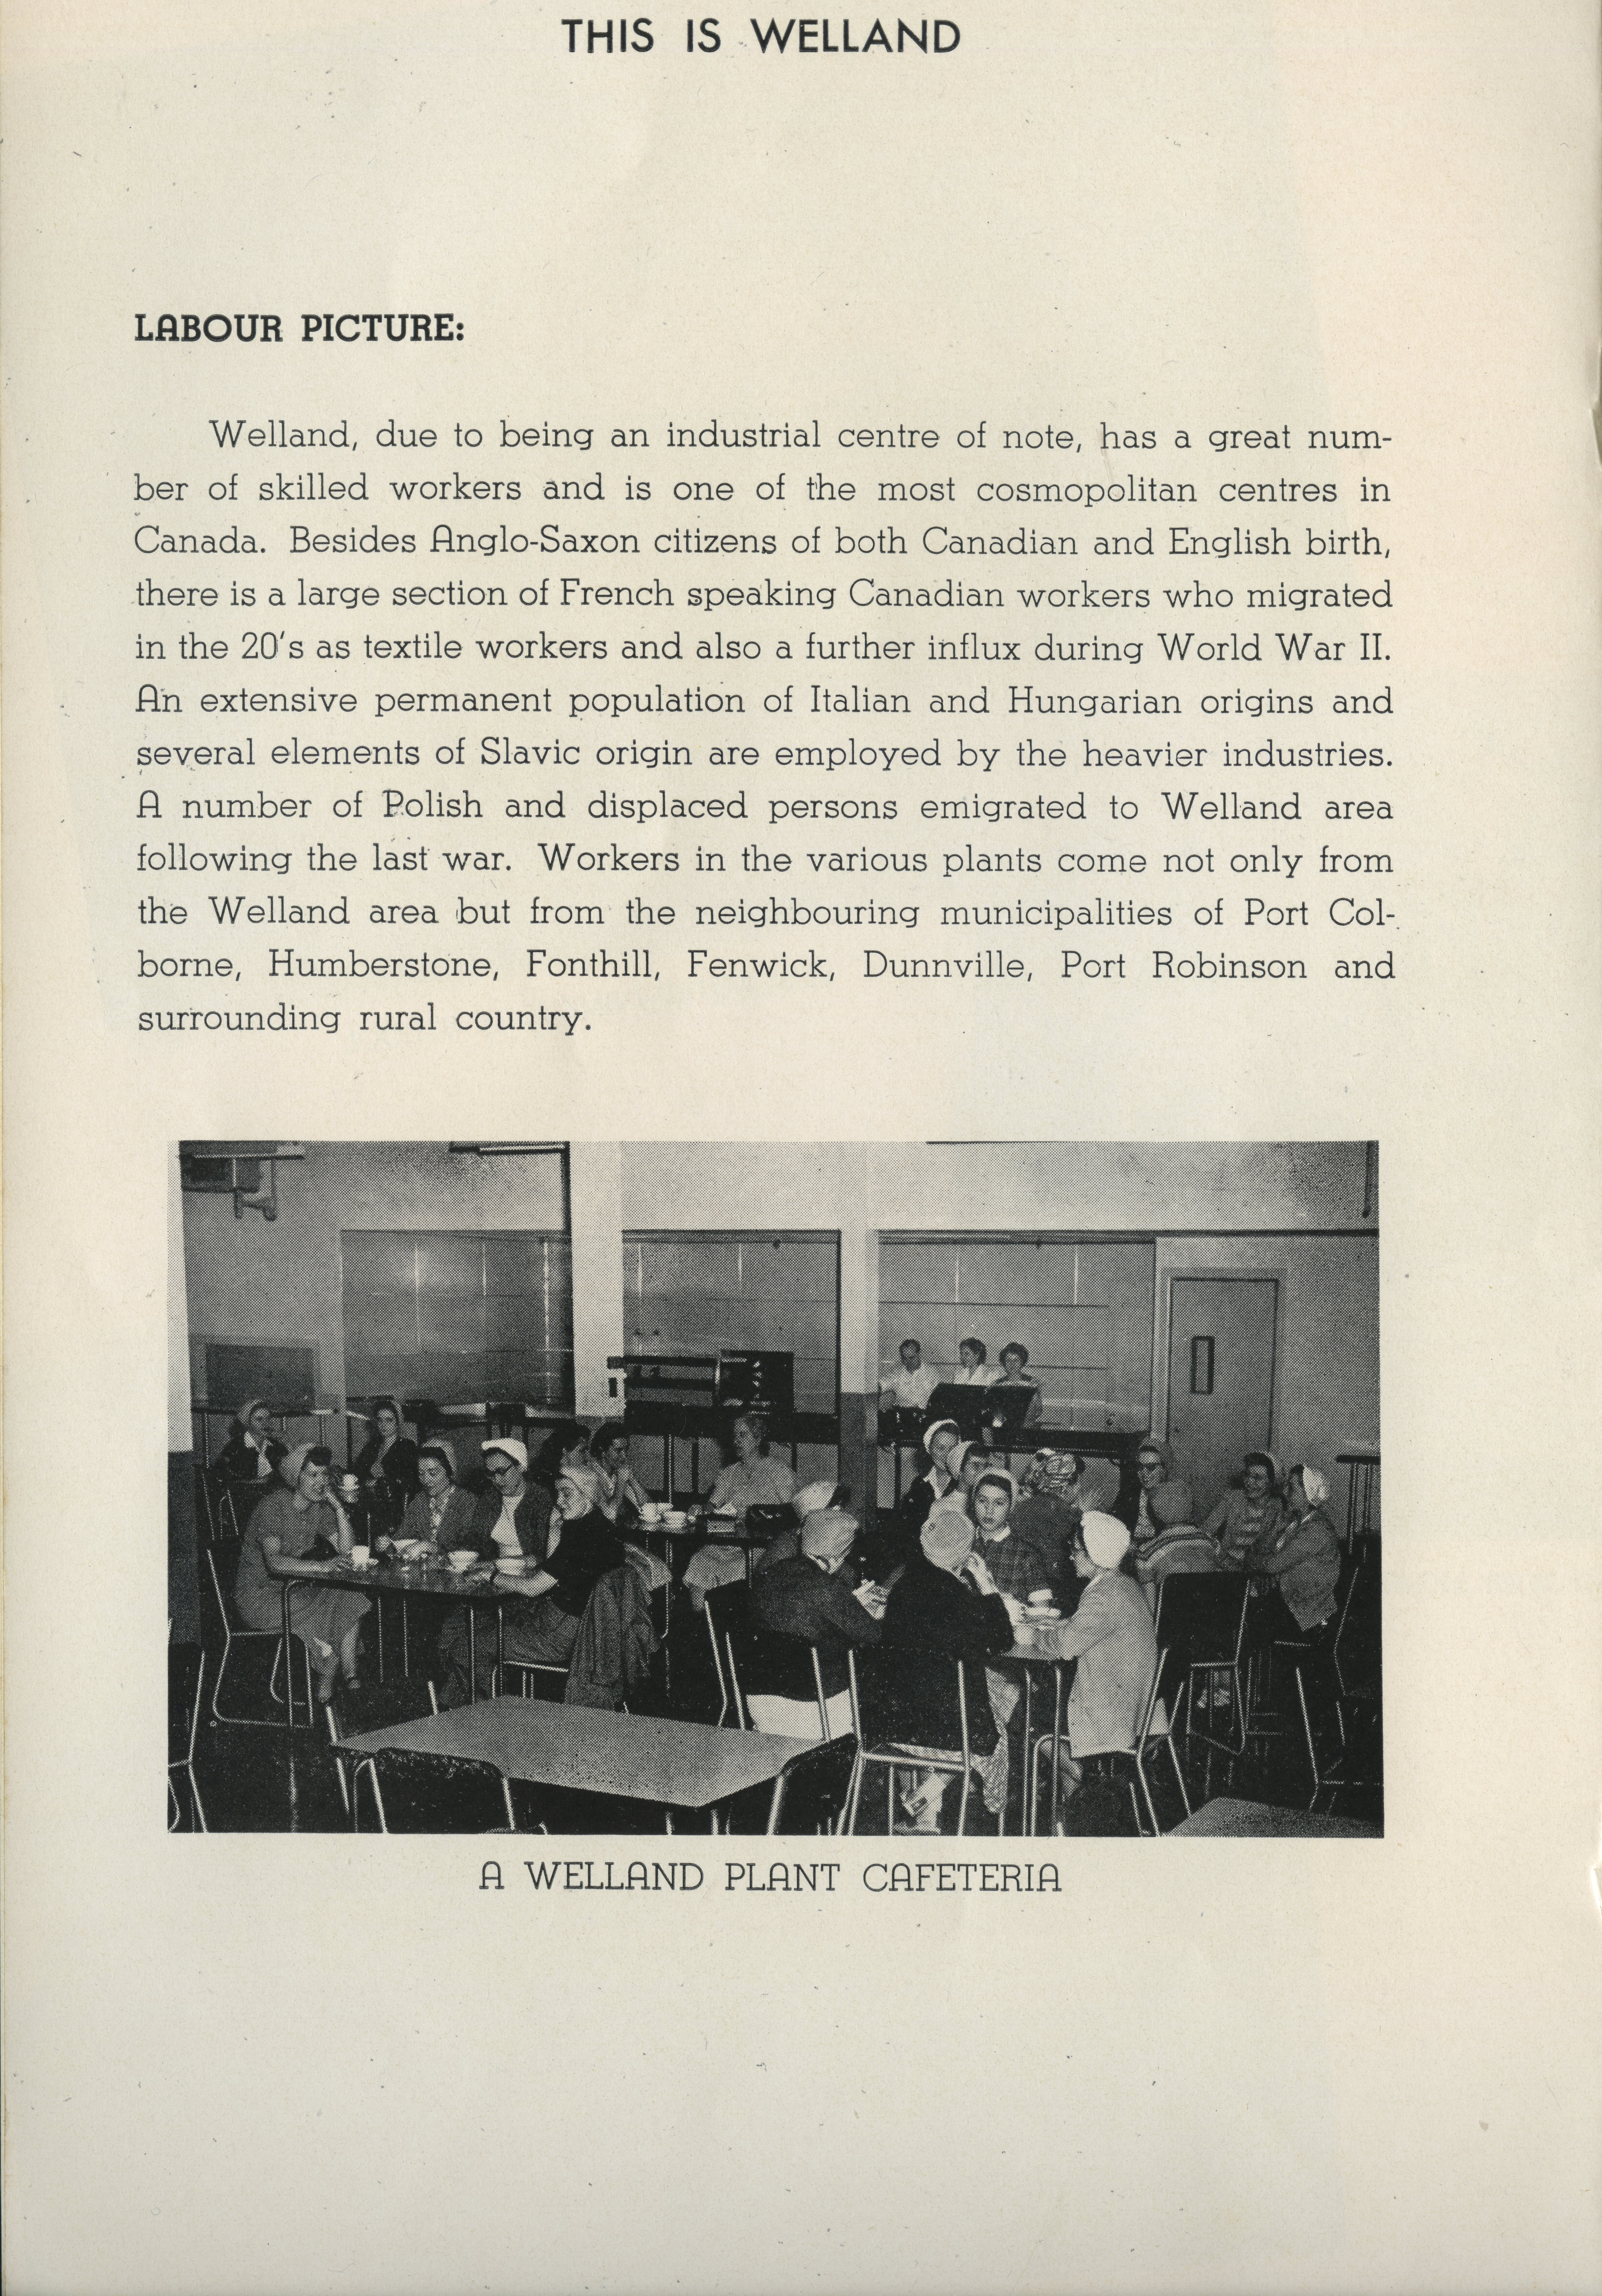 A page of a brochure with text, and a black and white photo of women in a cafeteria.